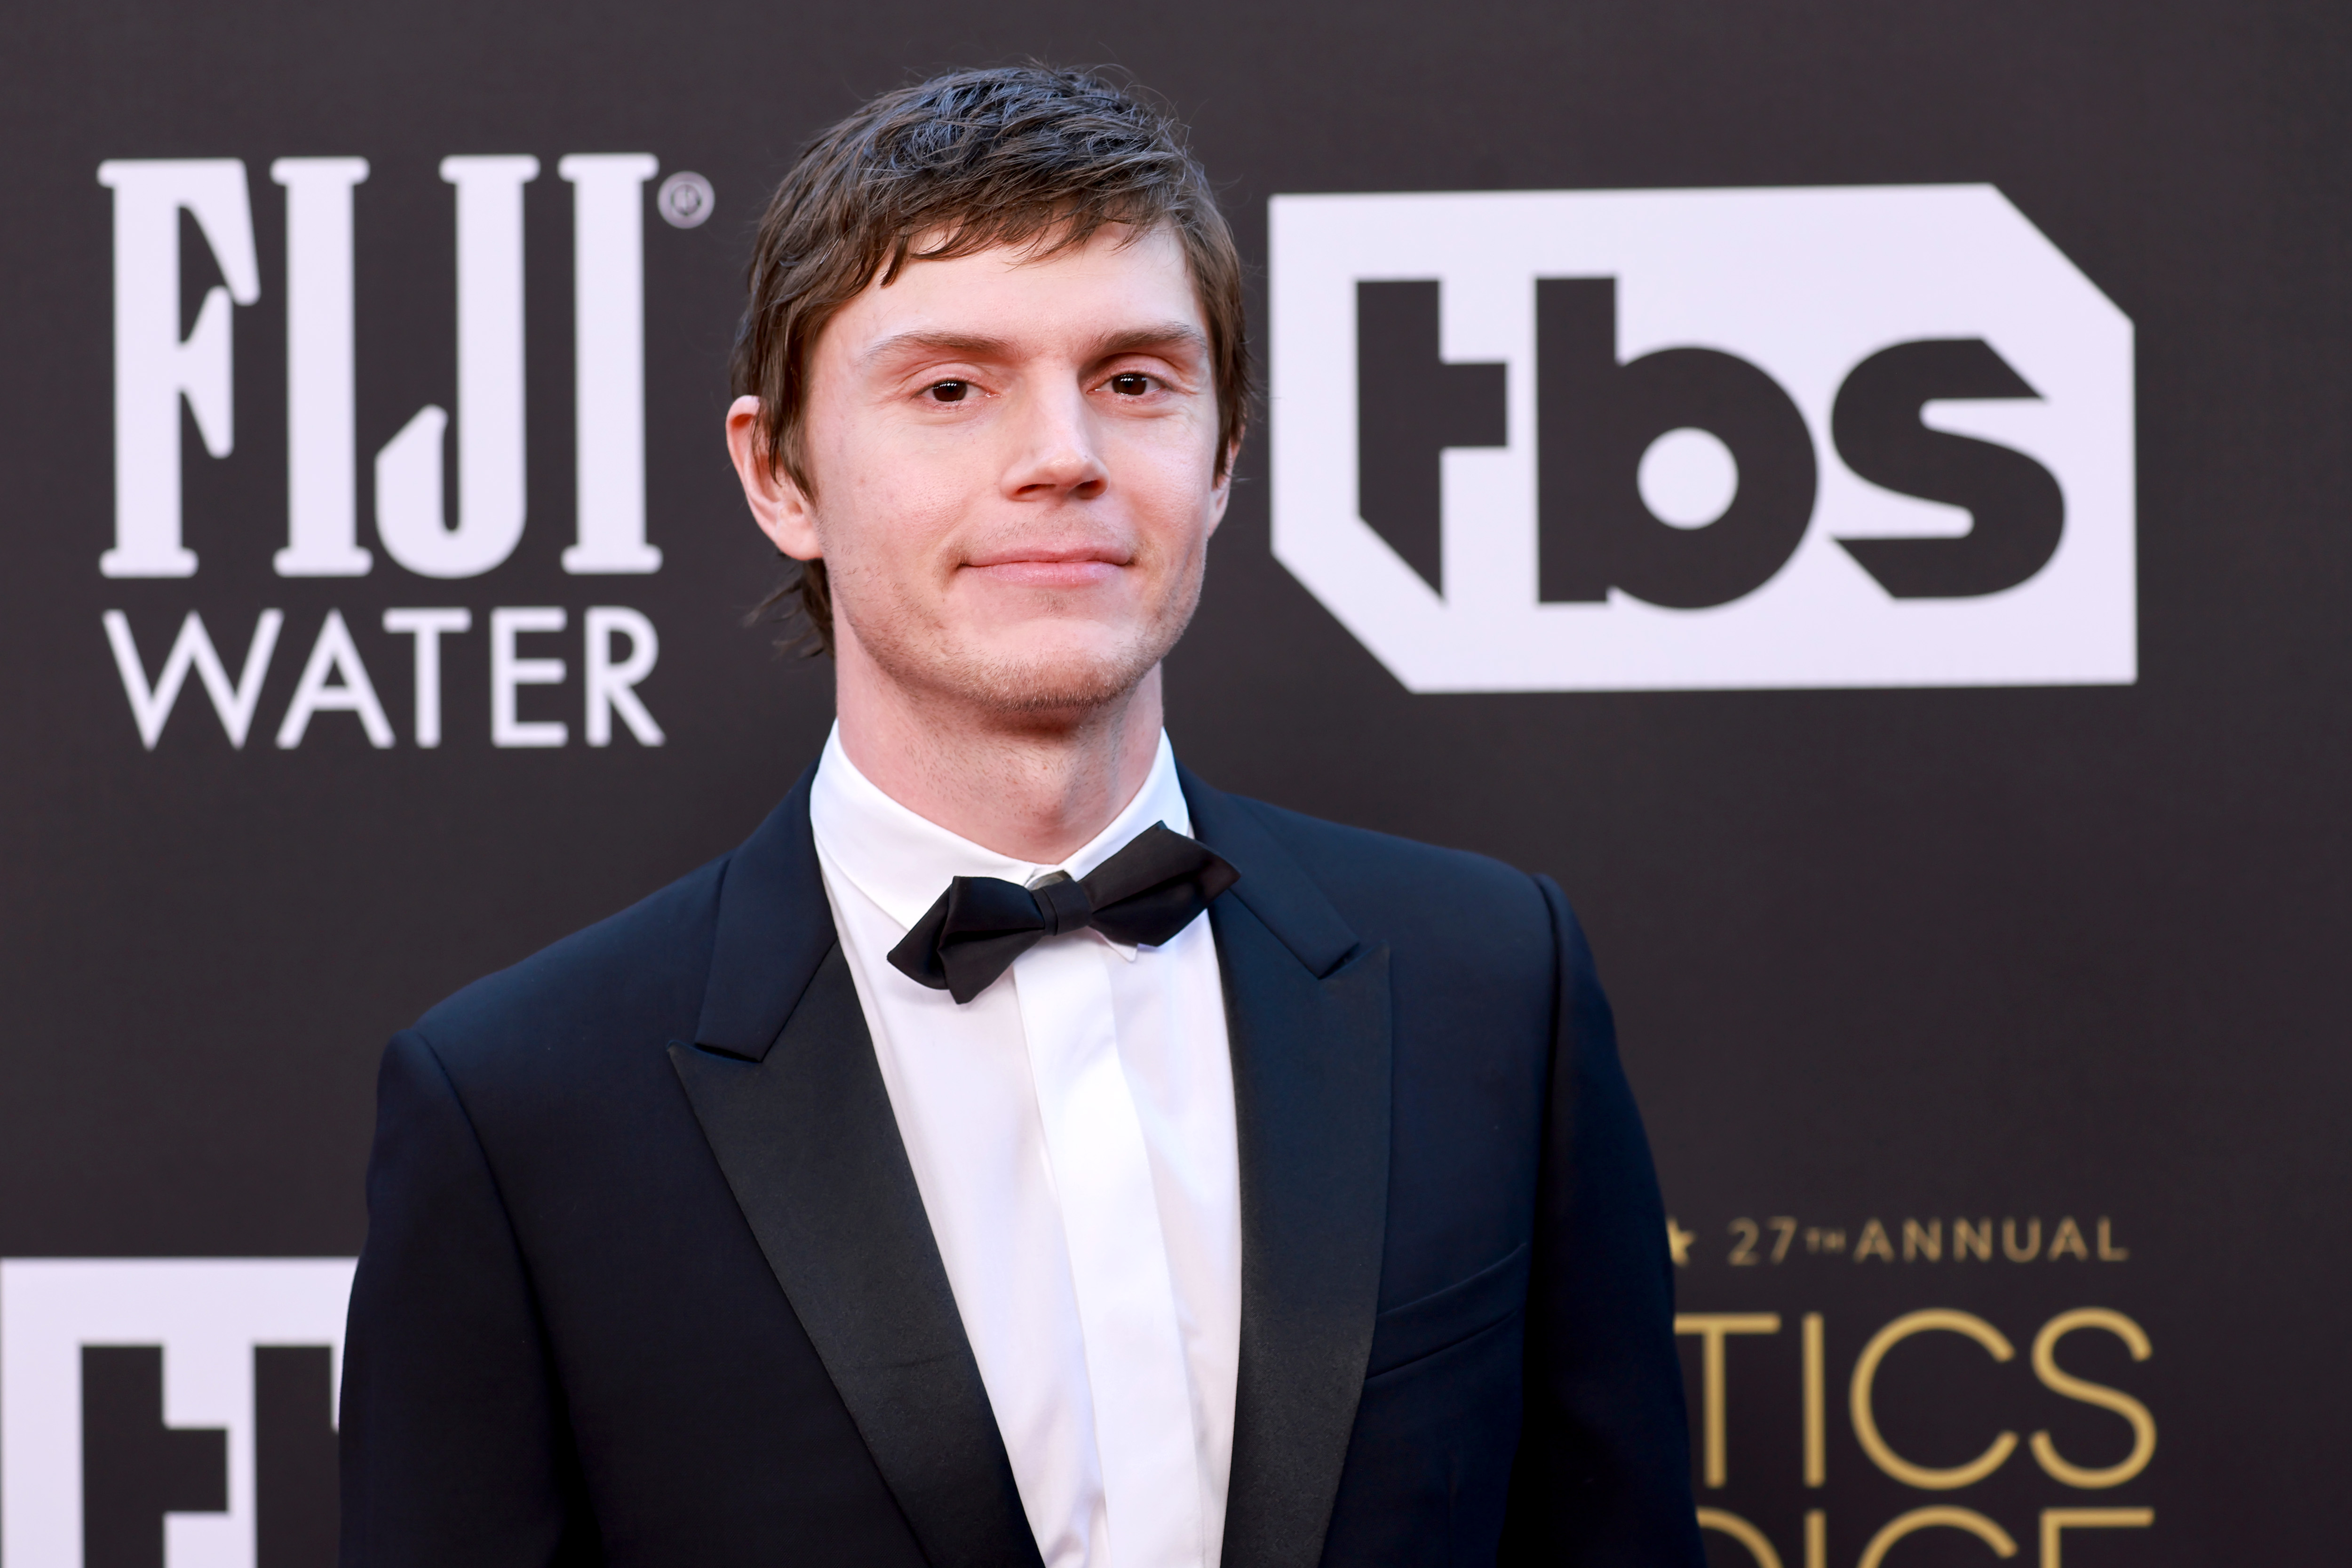 LOS ANGELES, CALIFORNIA - MARCH 13: Evan Peters attends the 27th Annual Critics Choice Awards at Fairmont Century Plaza on March 13, 2022 in Los Angeles, California. (Photo by Matt Winkelmeyer/Getty Images)